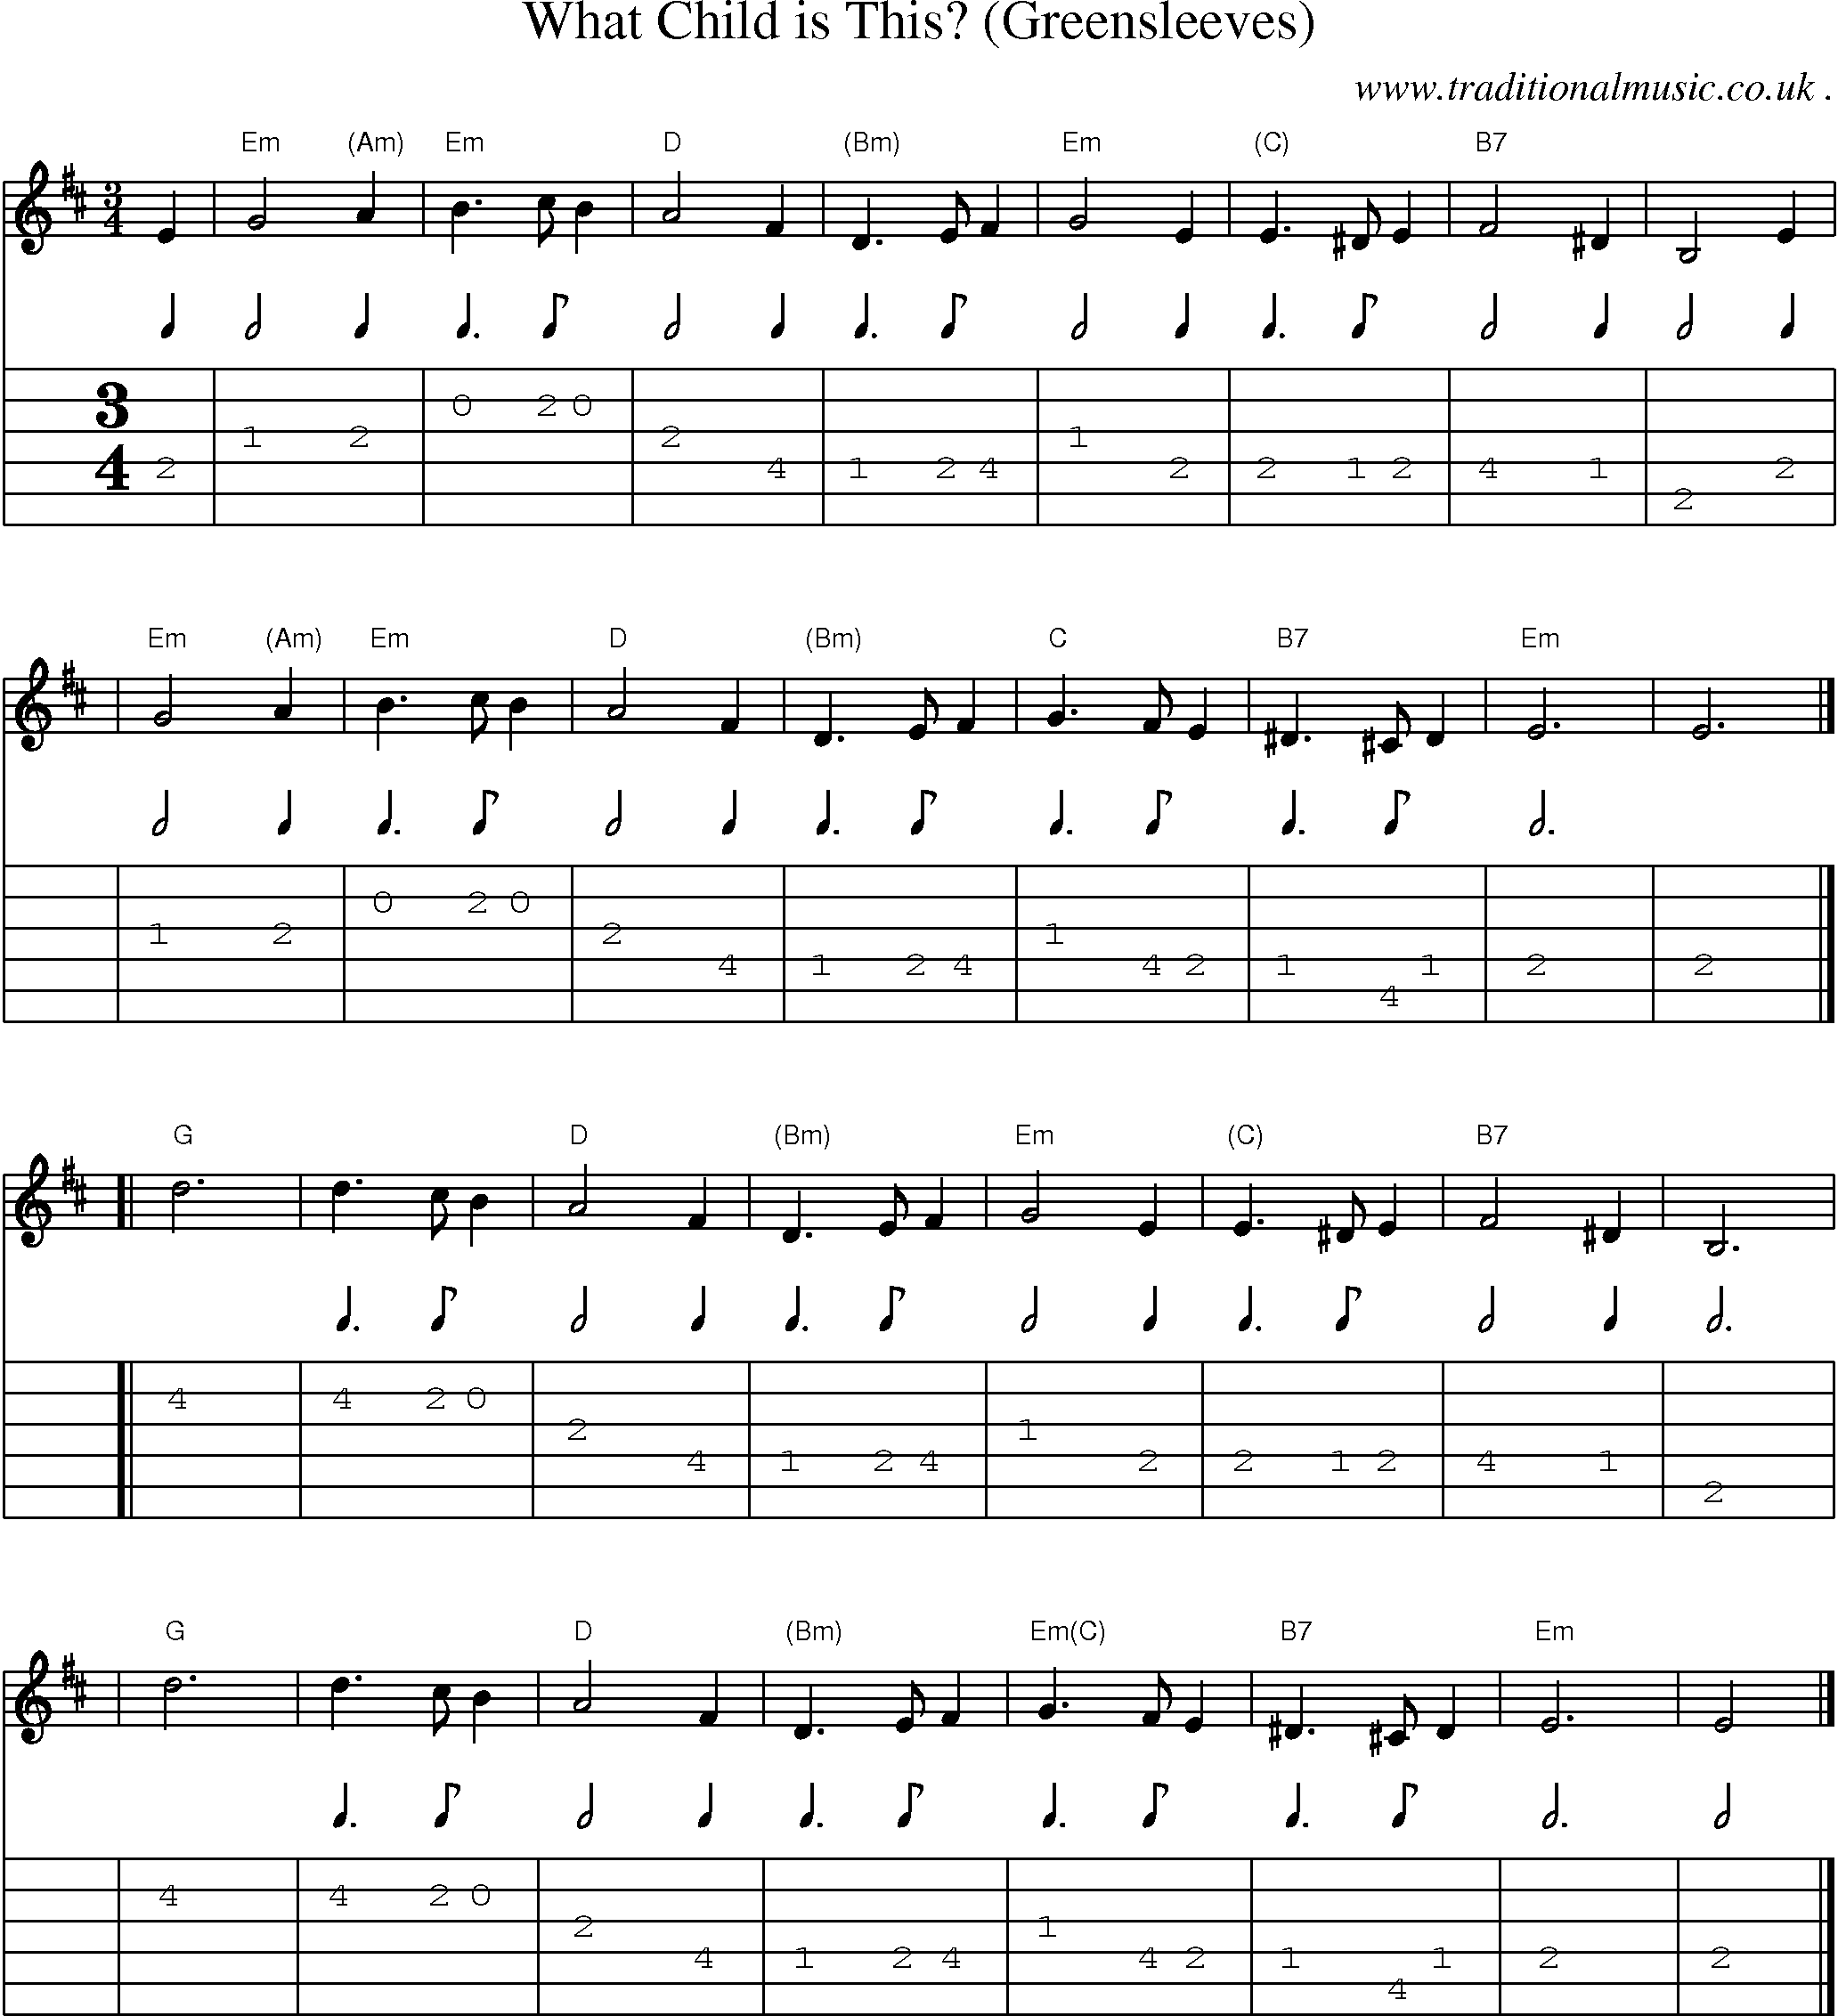 Sheet-music  score, Chords and Guitar Tabs for What Child Is This Greensleeves